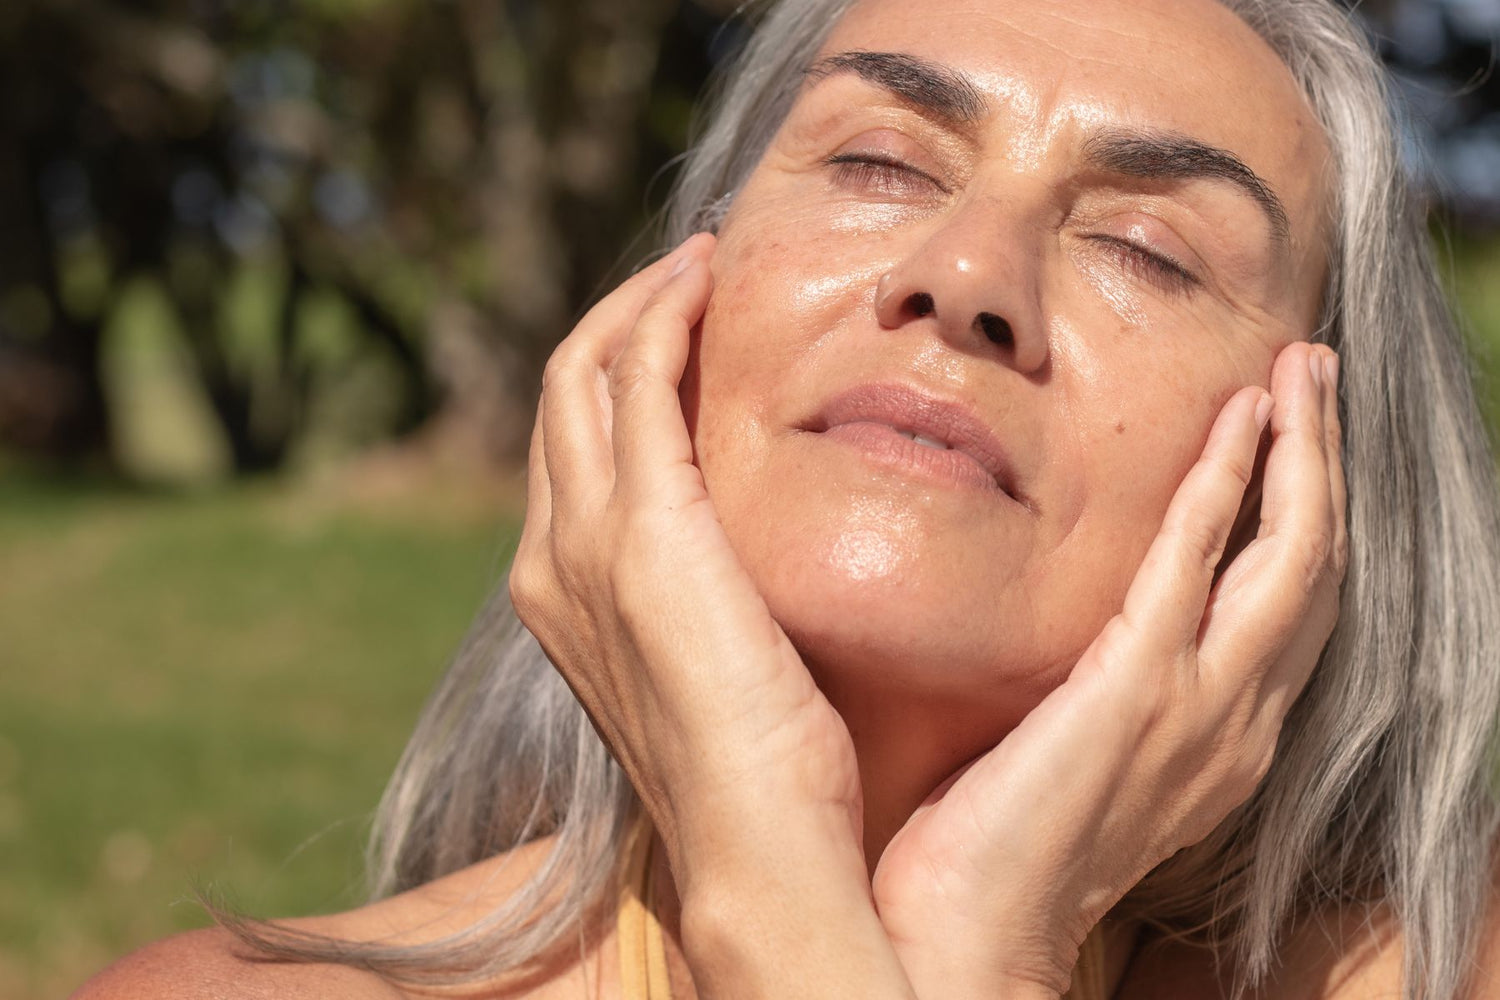 Radiant woman with glowing, healthy skin embracing the warmth of the sun.